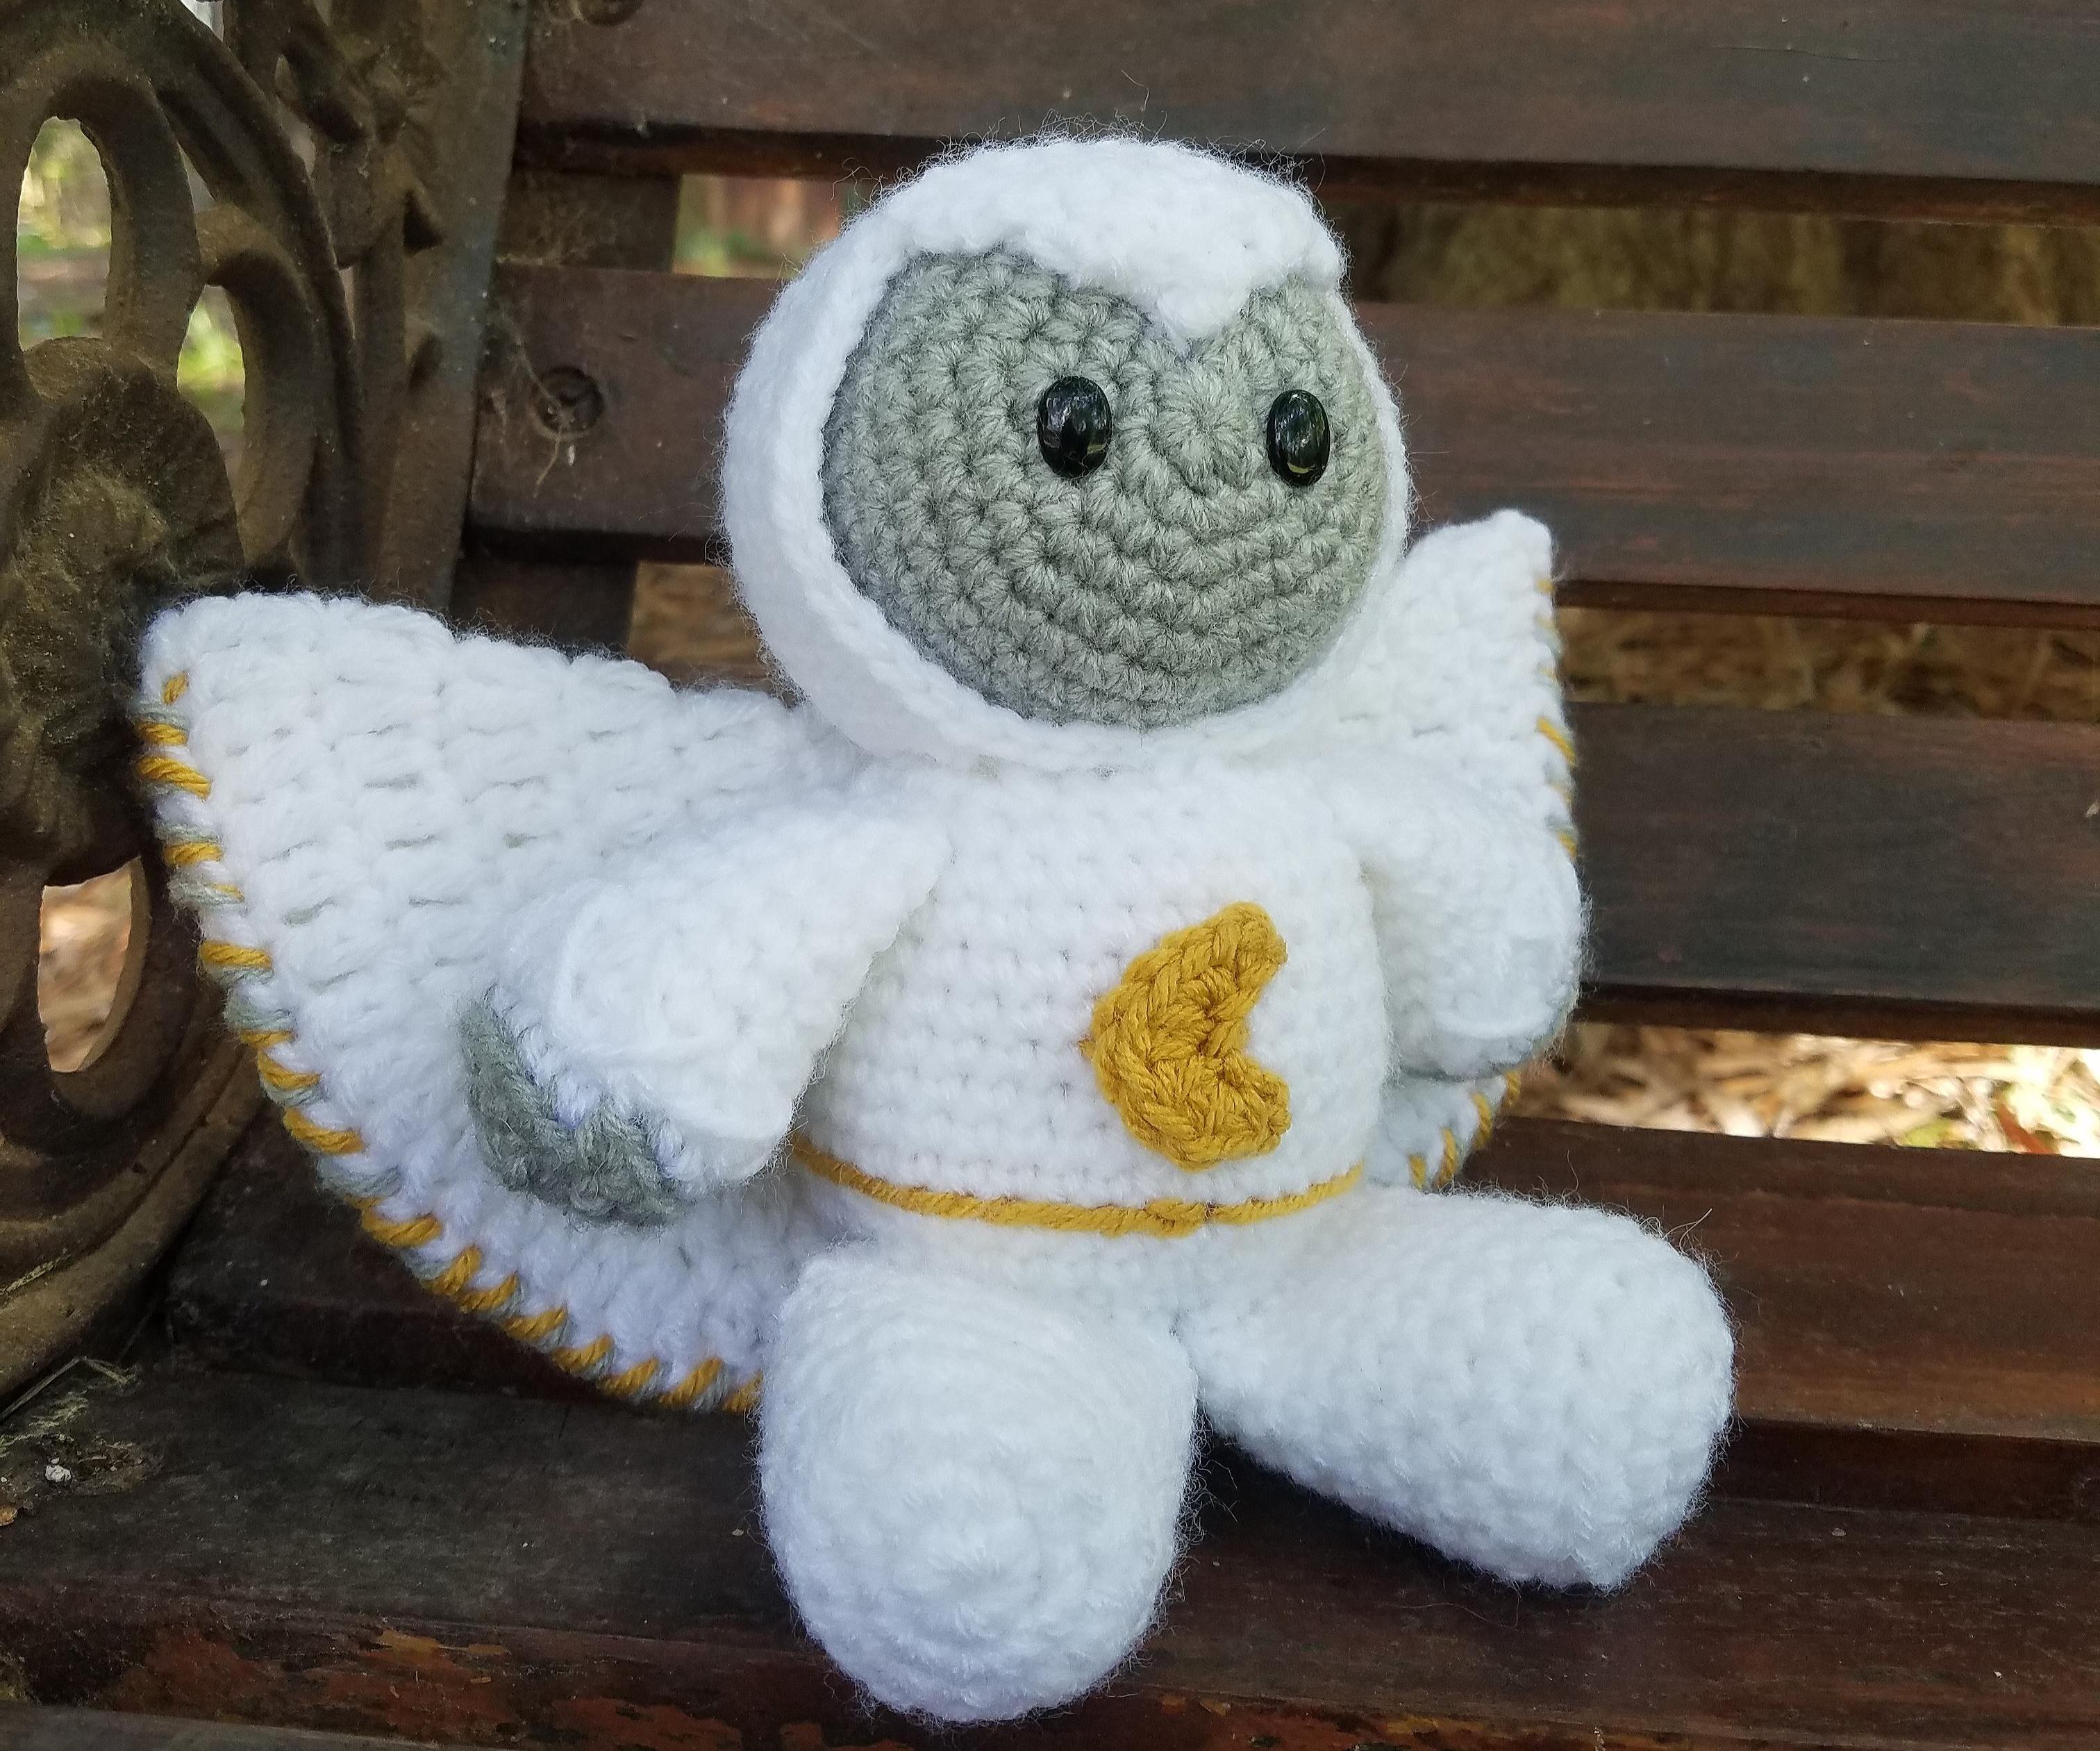 Easy Crochet Moon Knight Plush Toy (A Step-by-Step Visual Guide)